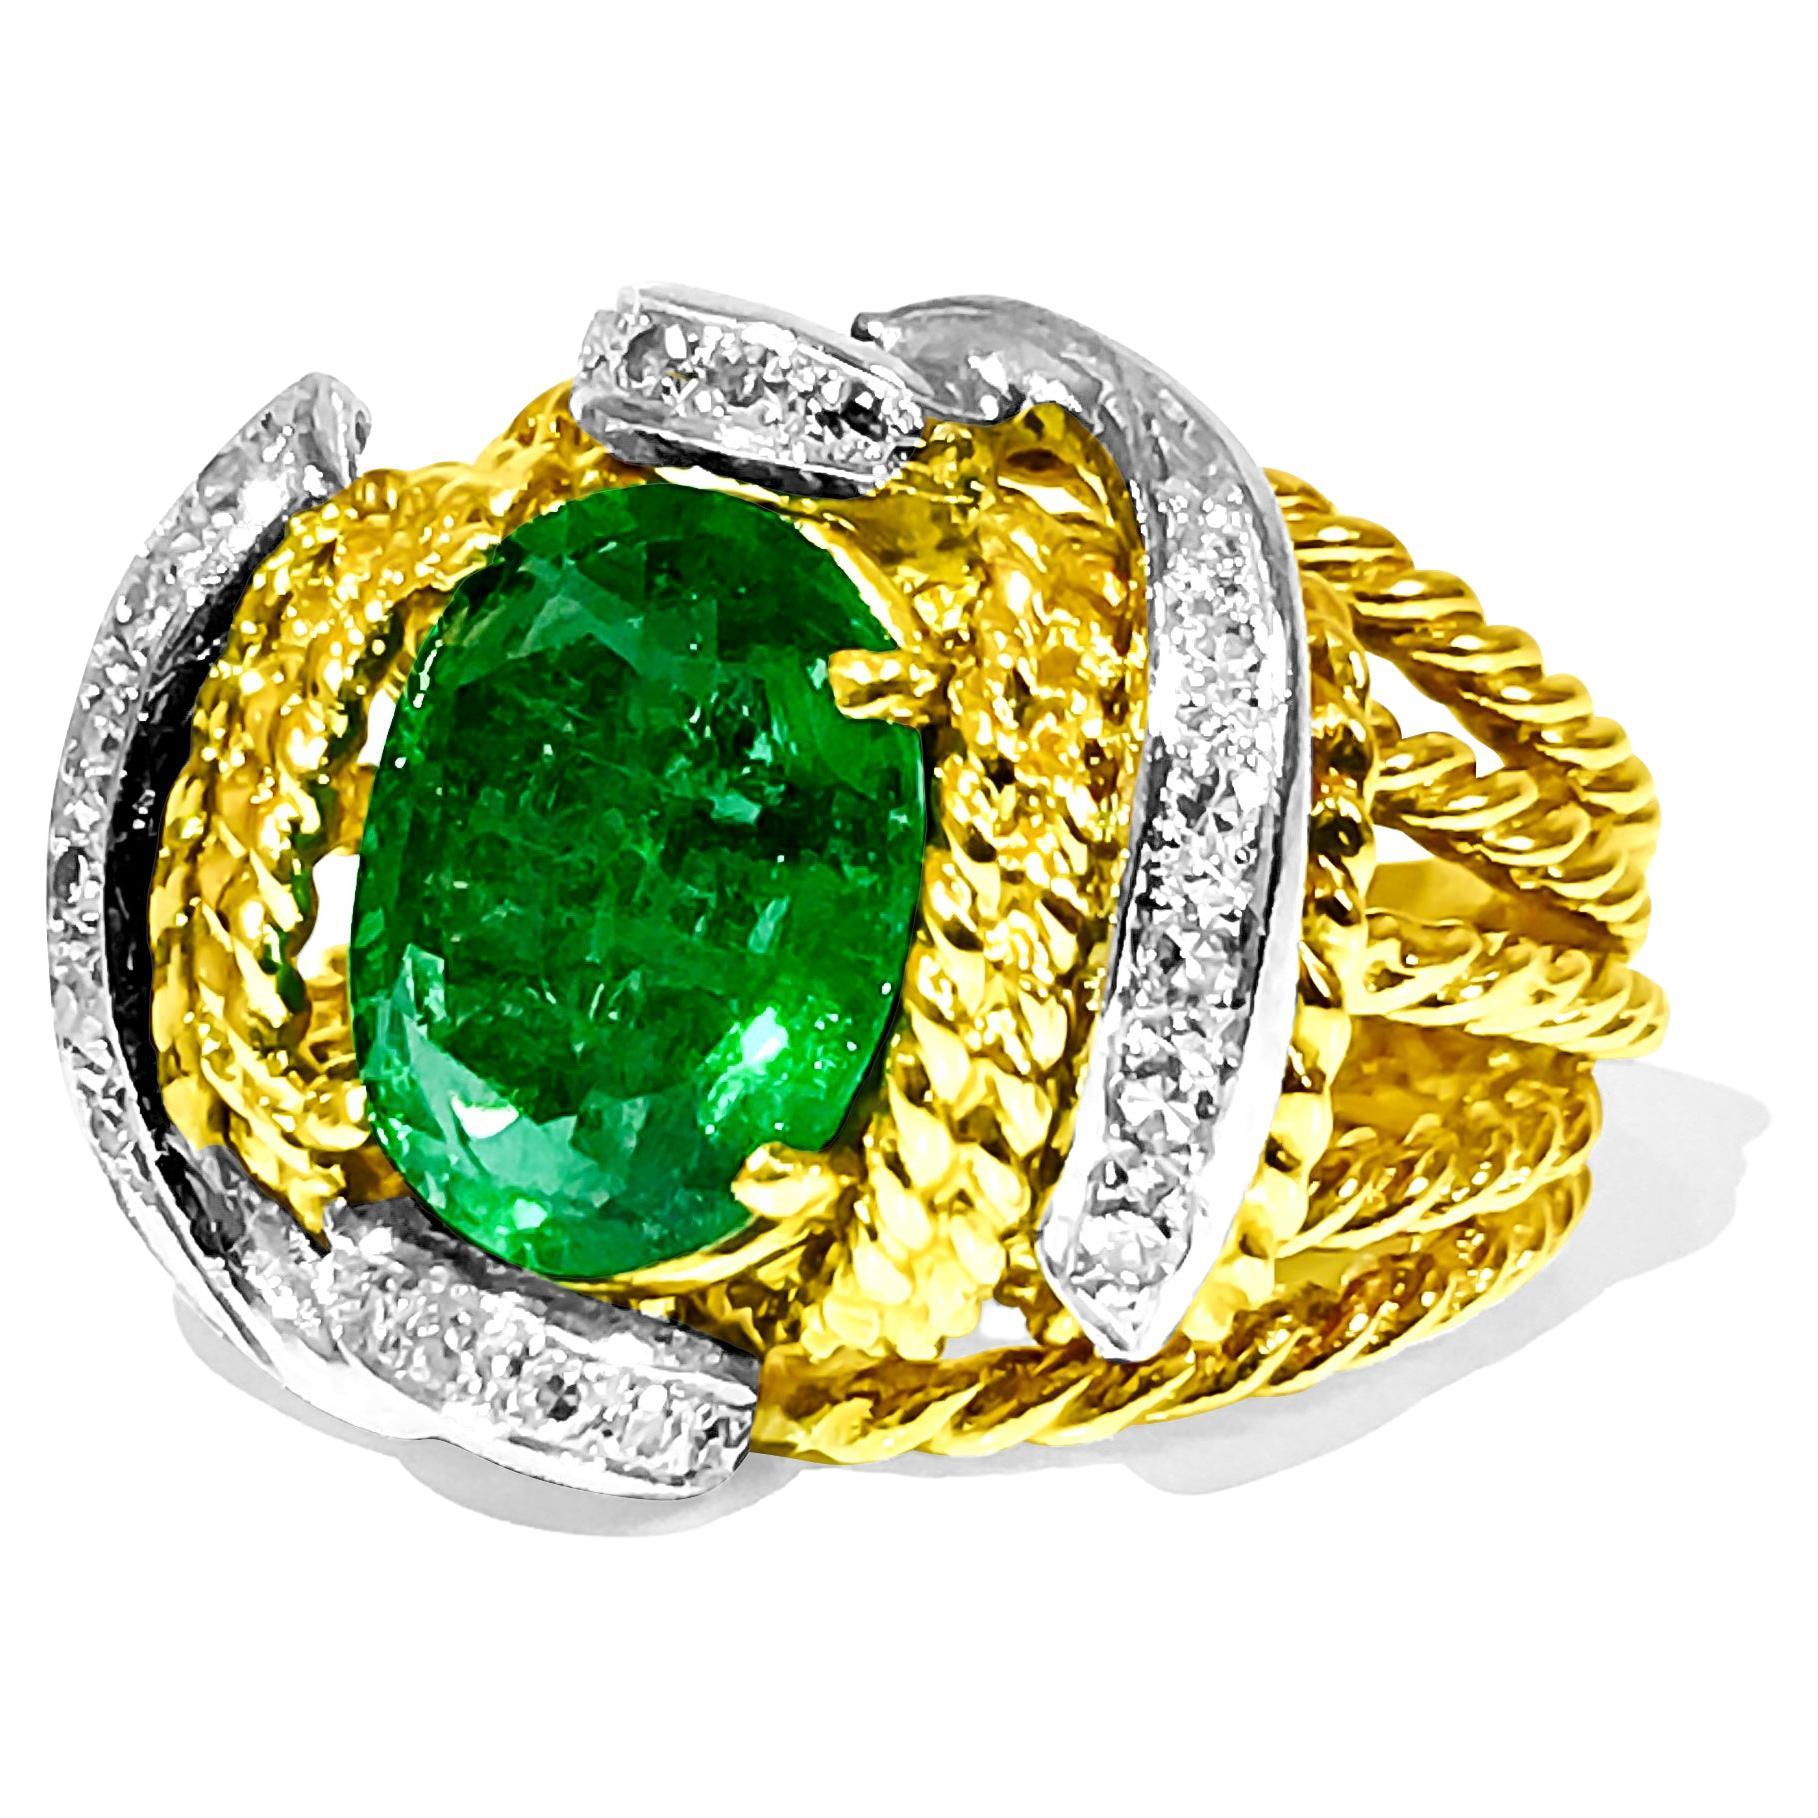 Natural 3.86 Carat Emerald Diamond Ring 18K Gold For Sale